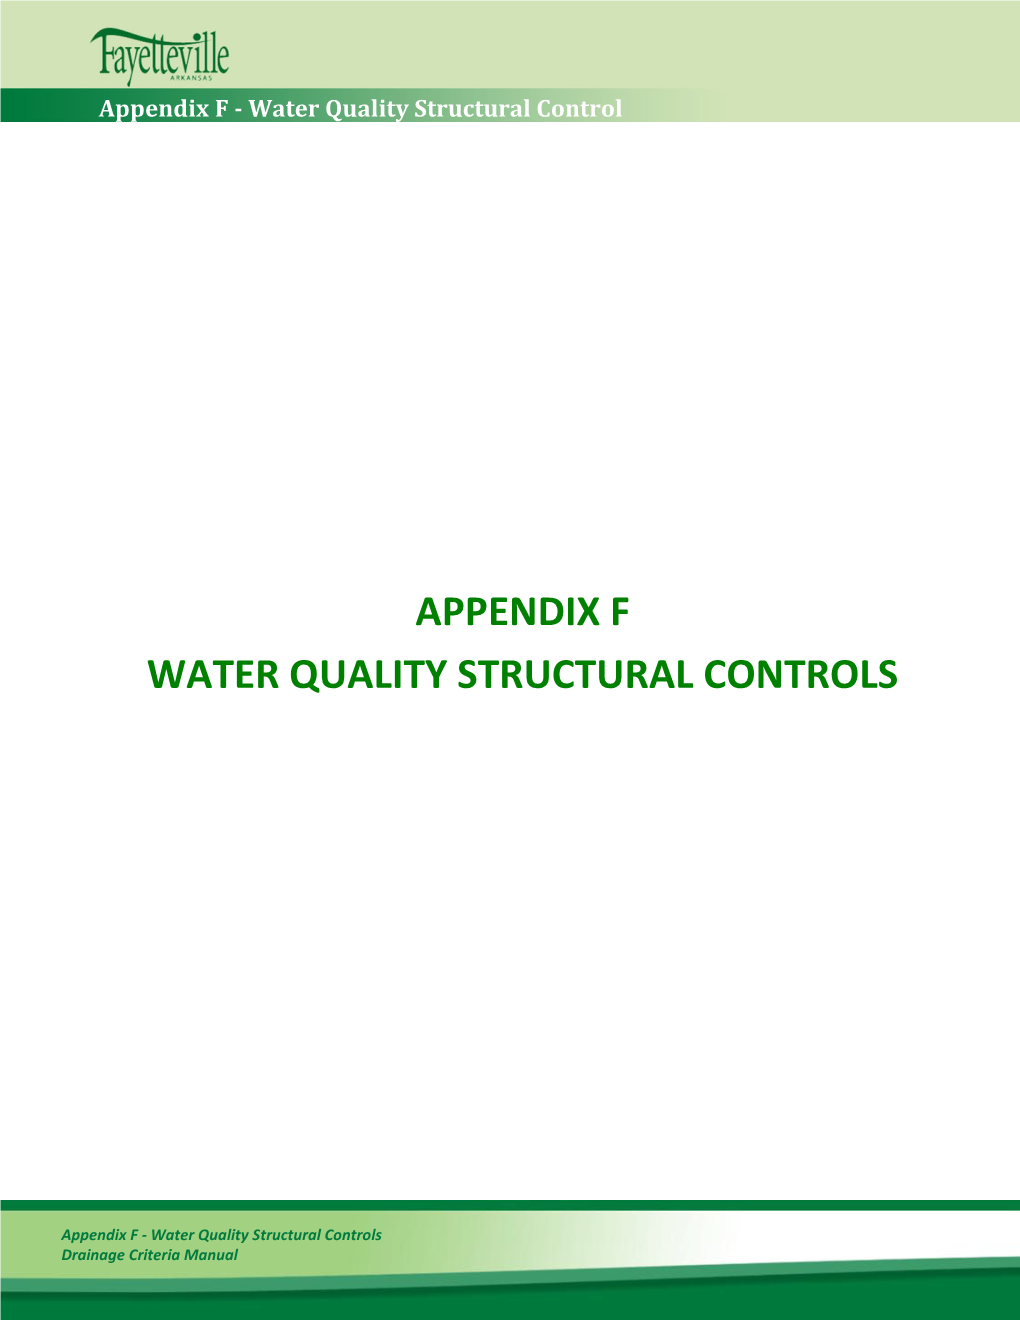 Appendix F Water Quality Structural Controls